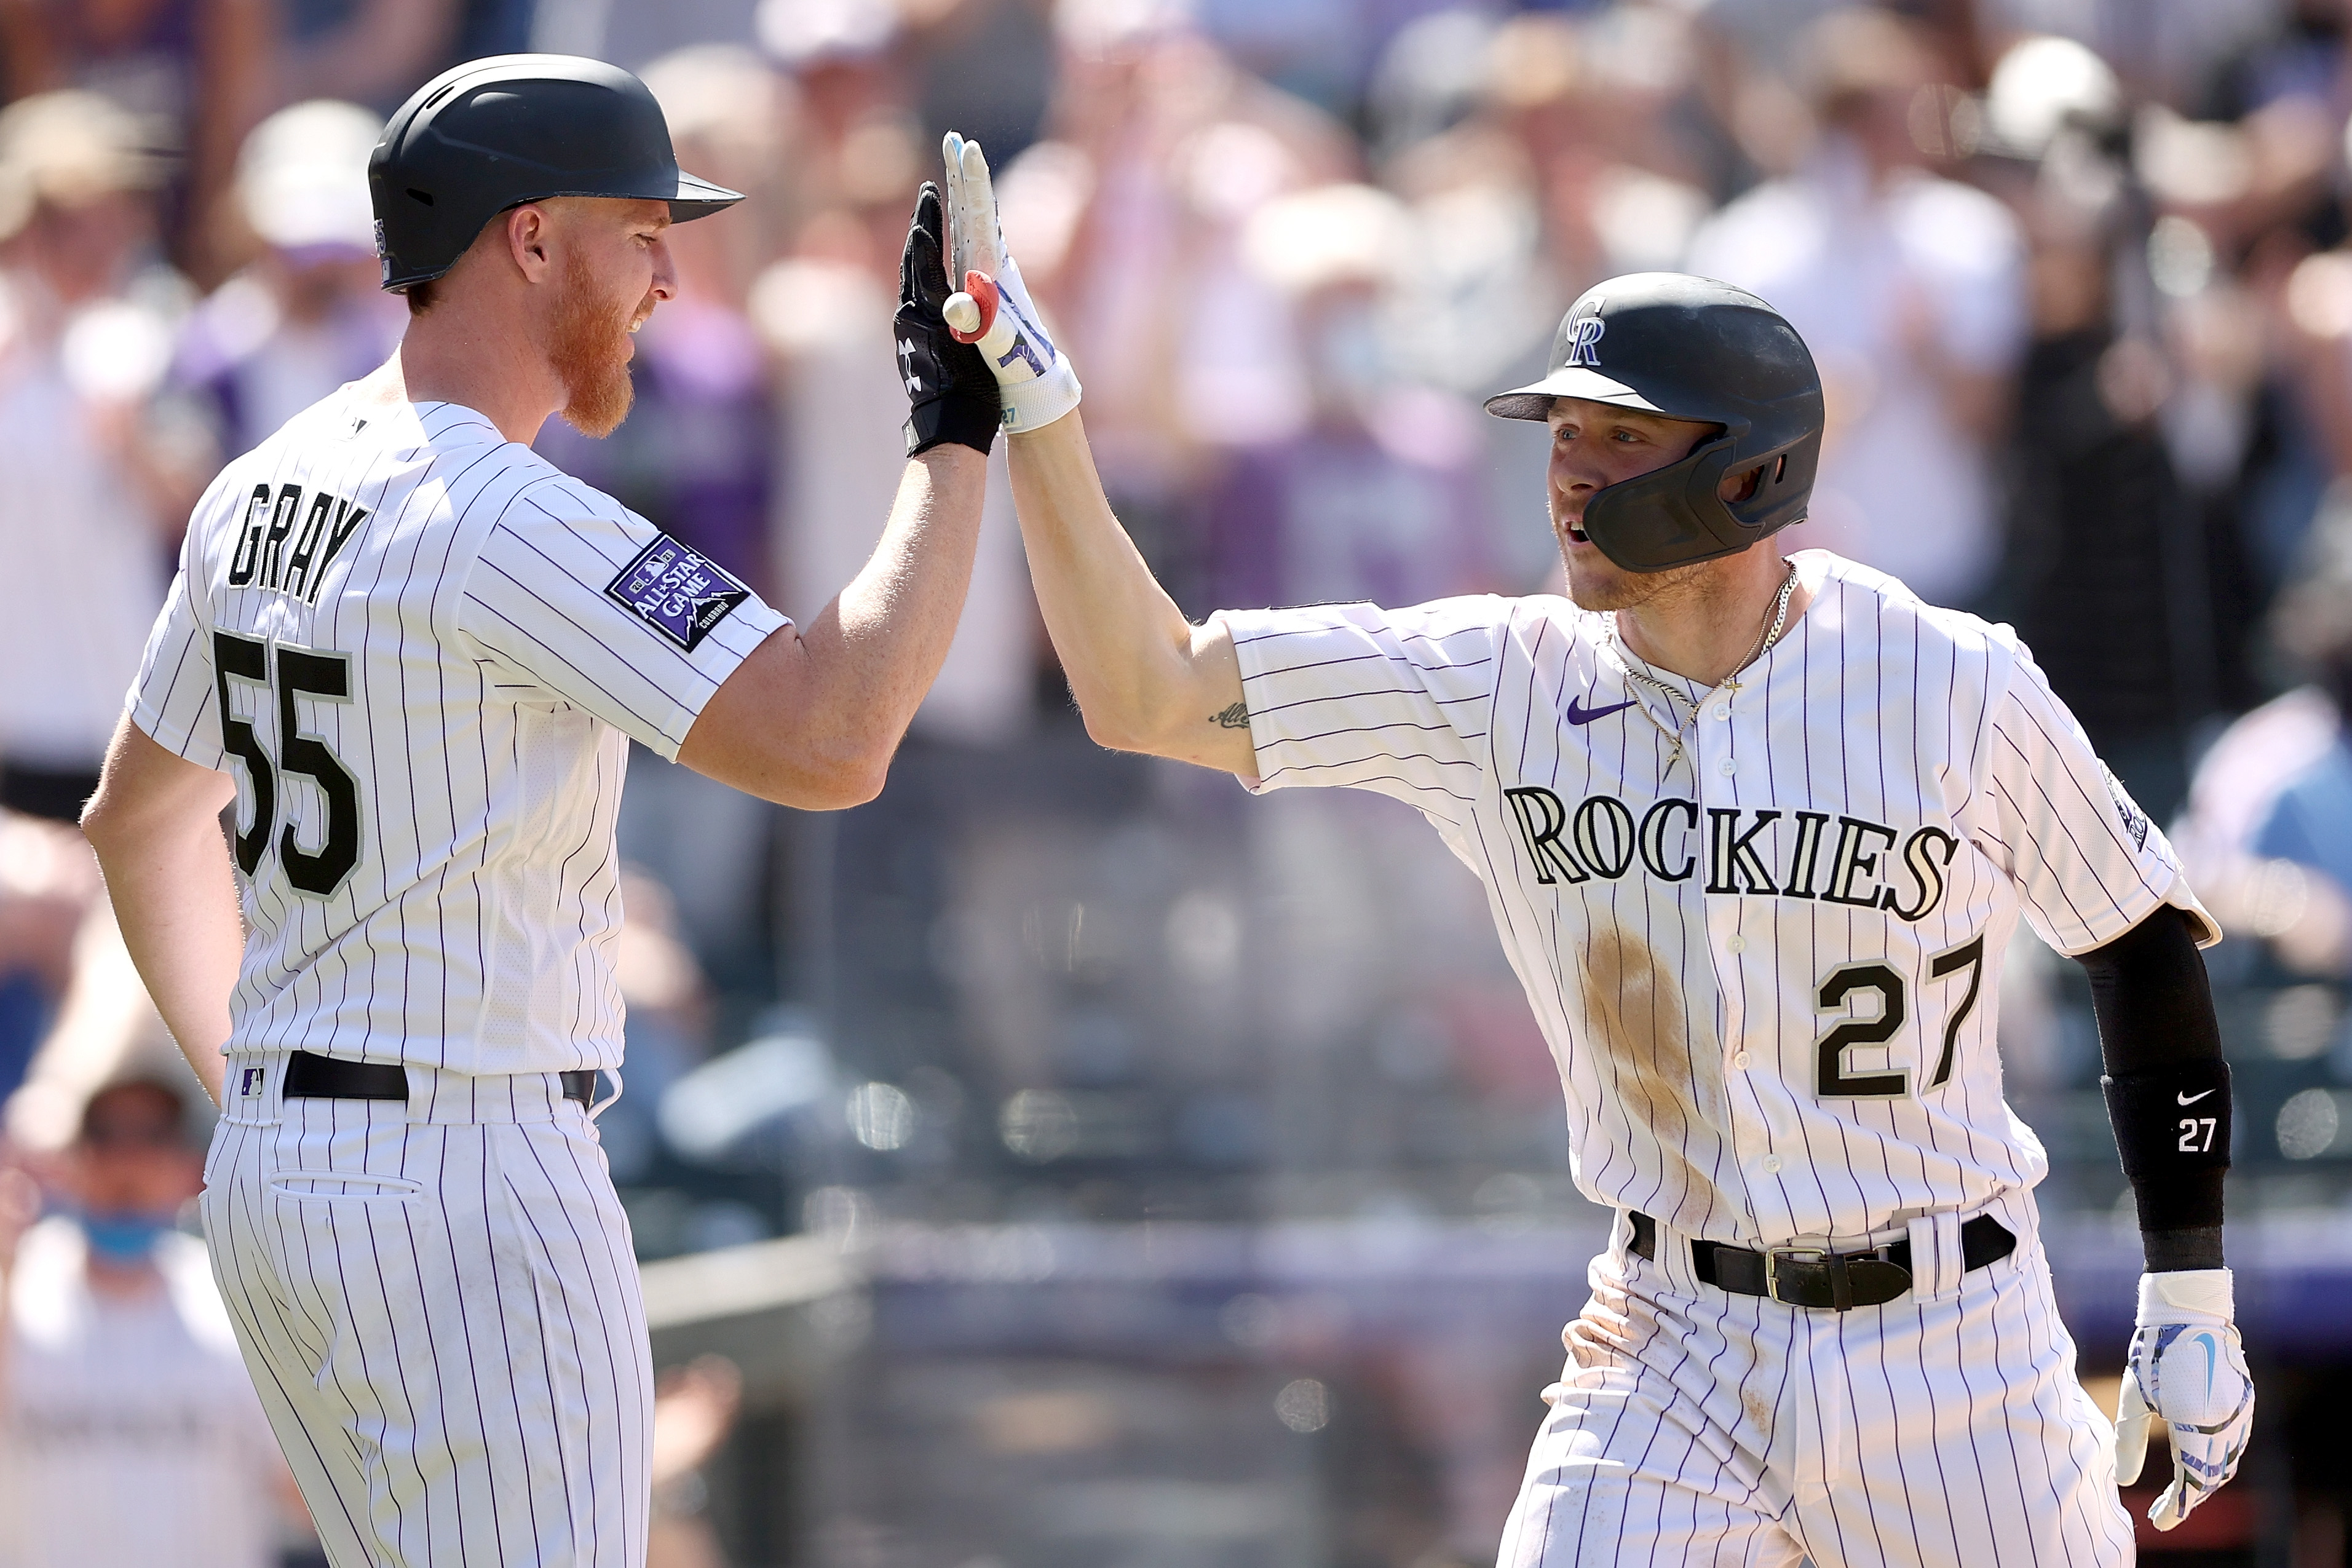 Rockies pitcher Jon Gray and Rockies shortstop Trevor Story high-five in a game against the Phillies